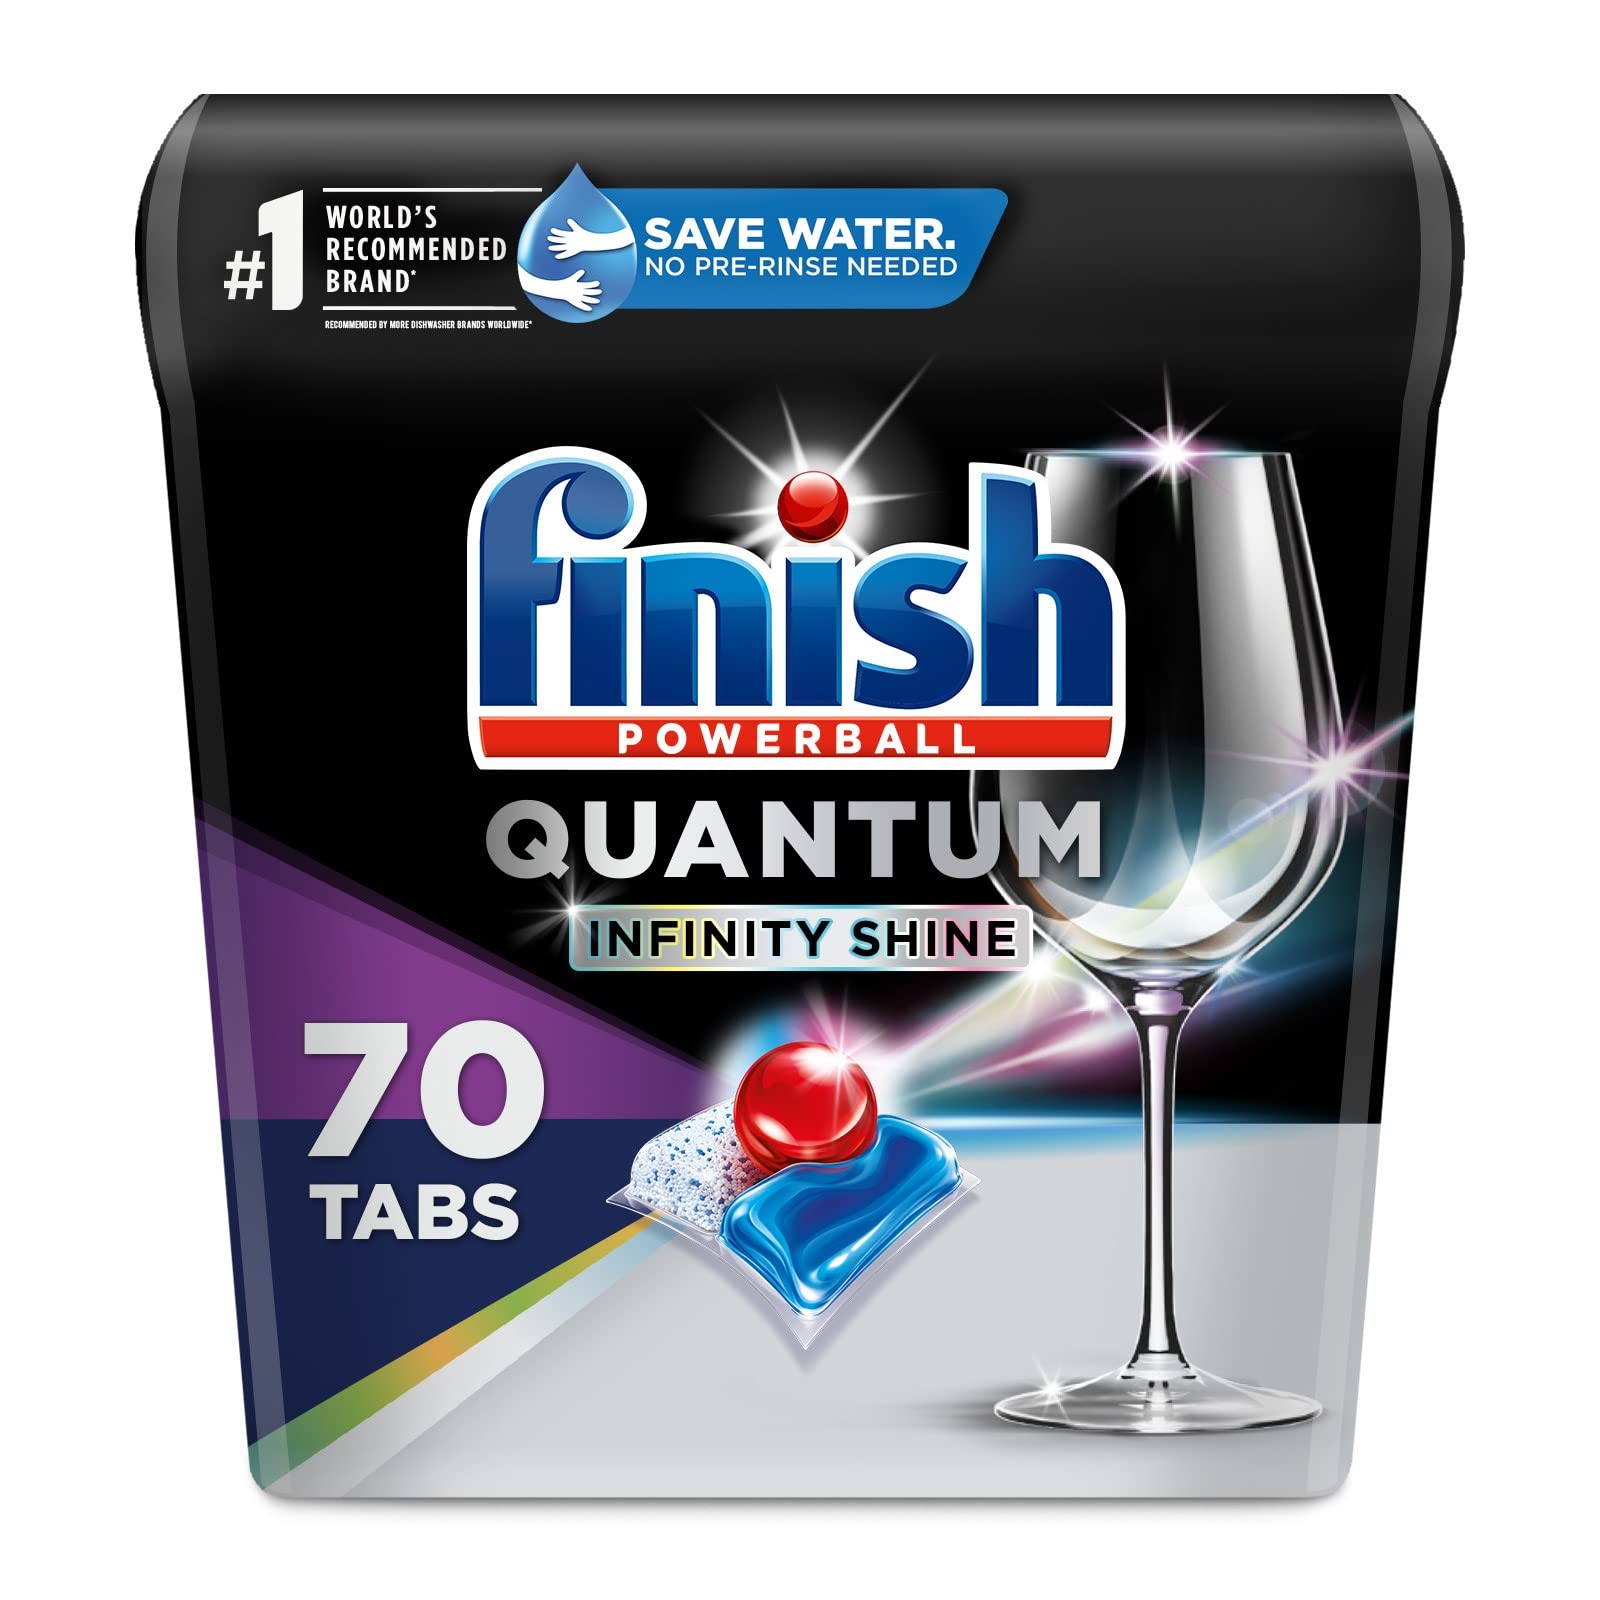 Finish Quantum Infinity Shine - 70 Count - Dishwasher Detergent - Powerball $15.54 or less with coupon and Amazon S&S $15.36